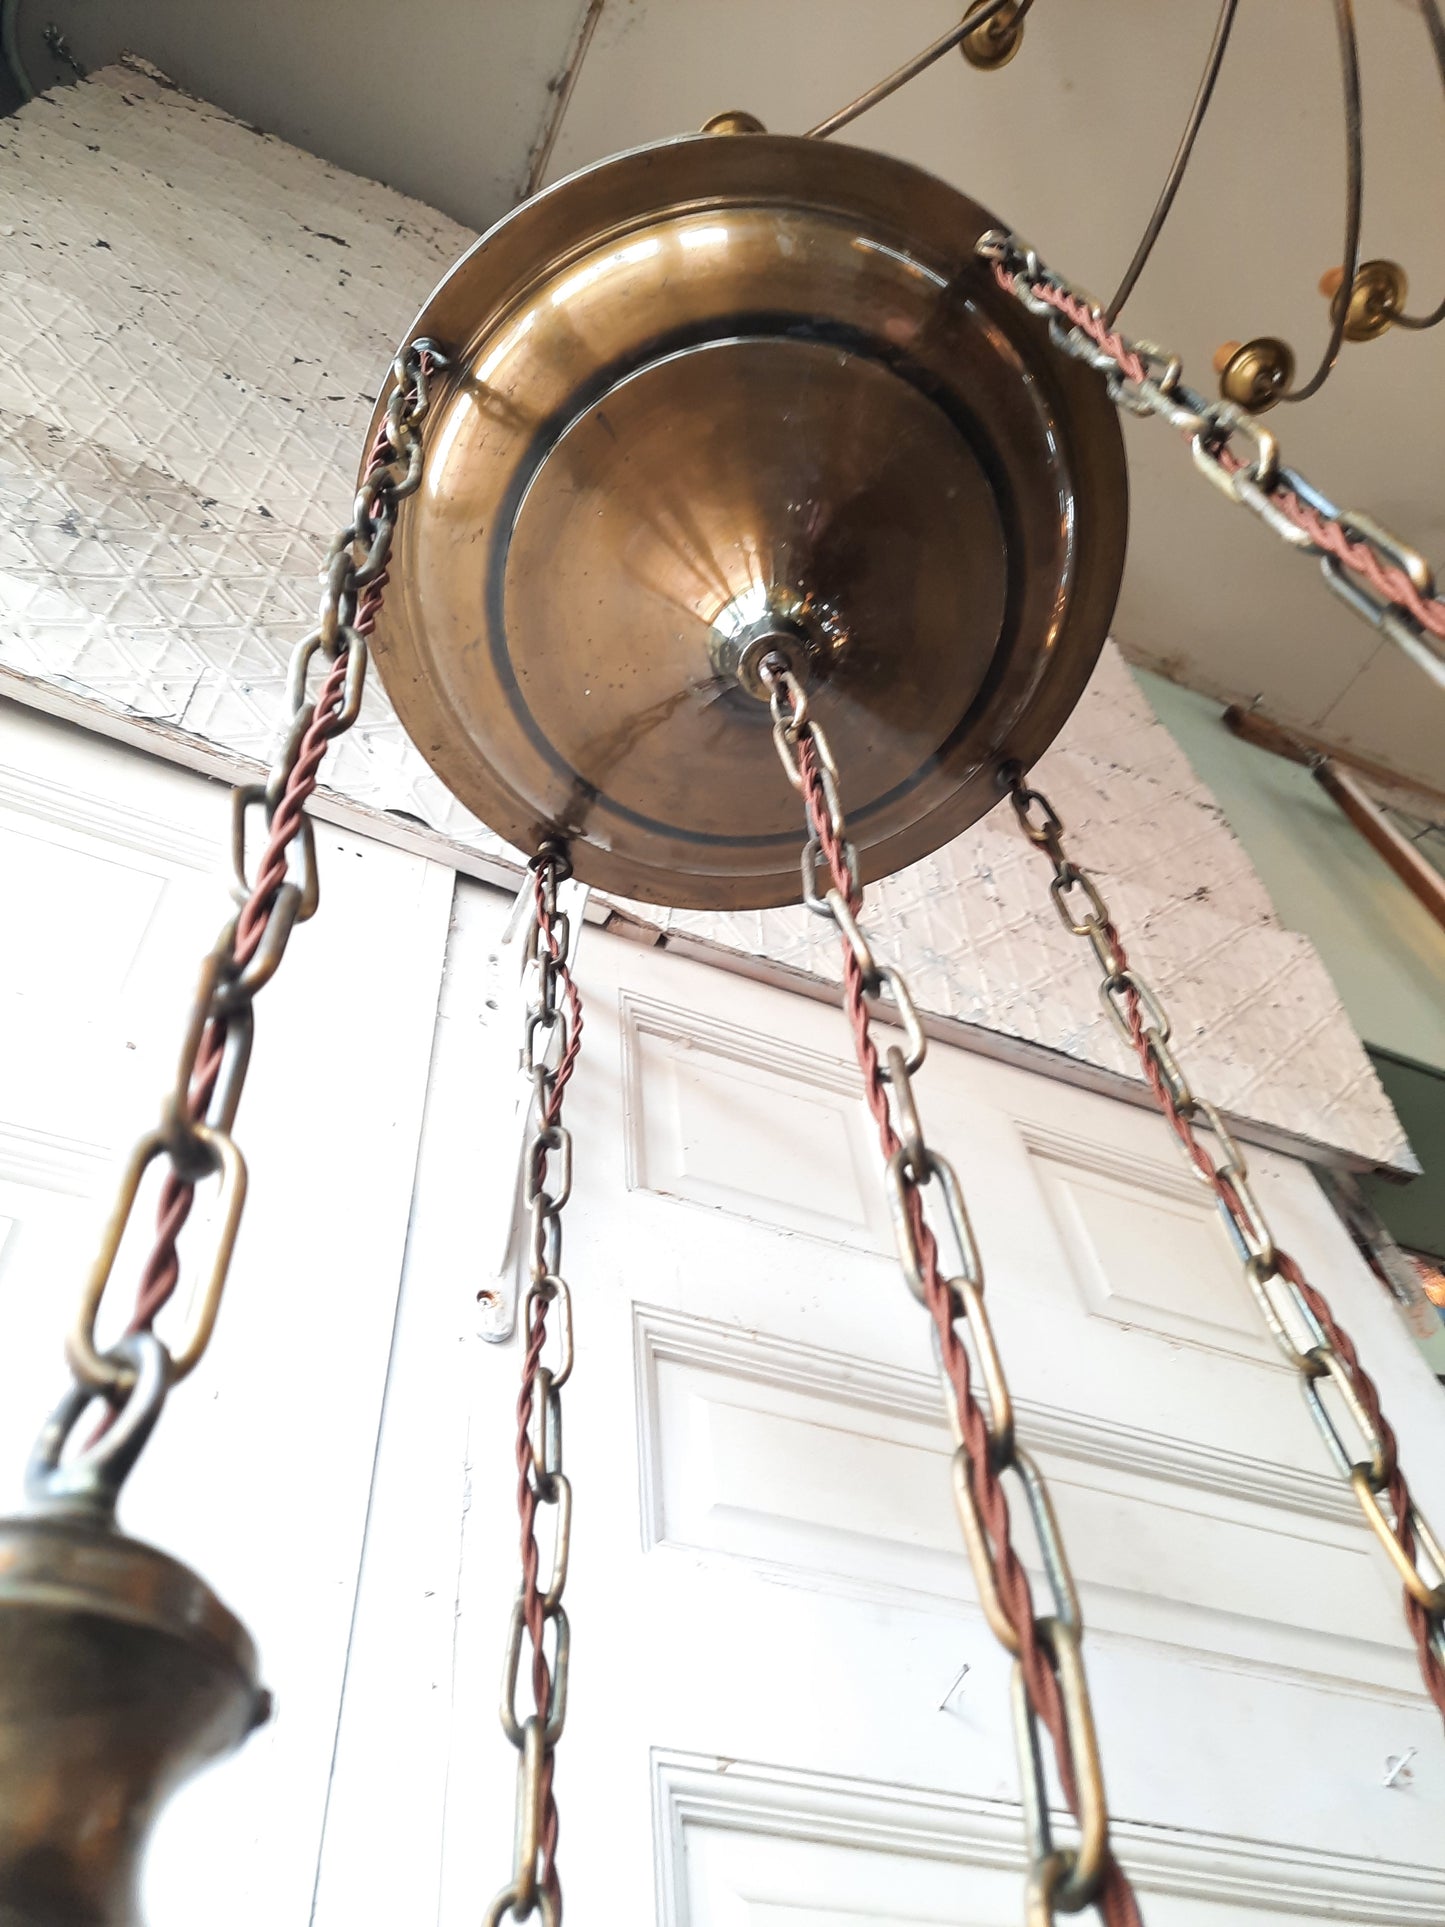 Antique Brass Pan Light with Five Hanging Chain Lights, Large Flush Mount Ceiling Light with Hanging Sockets